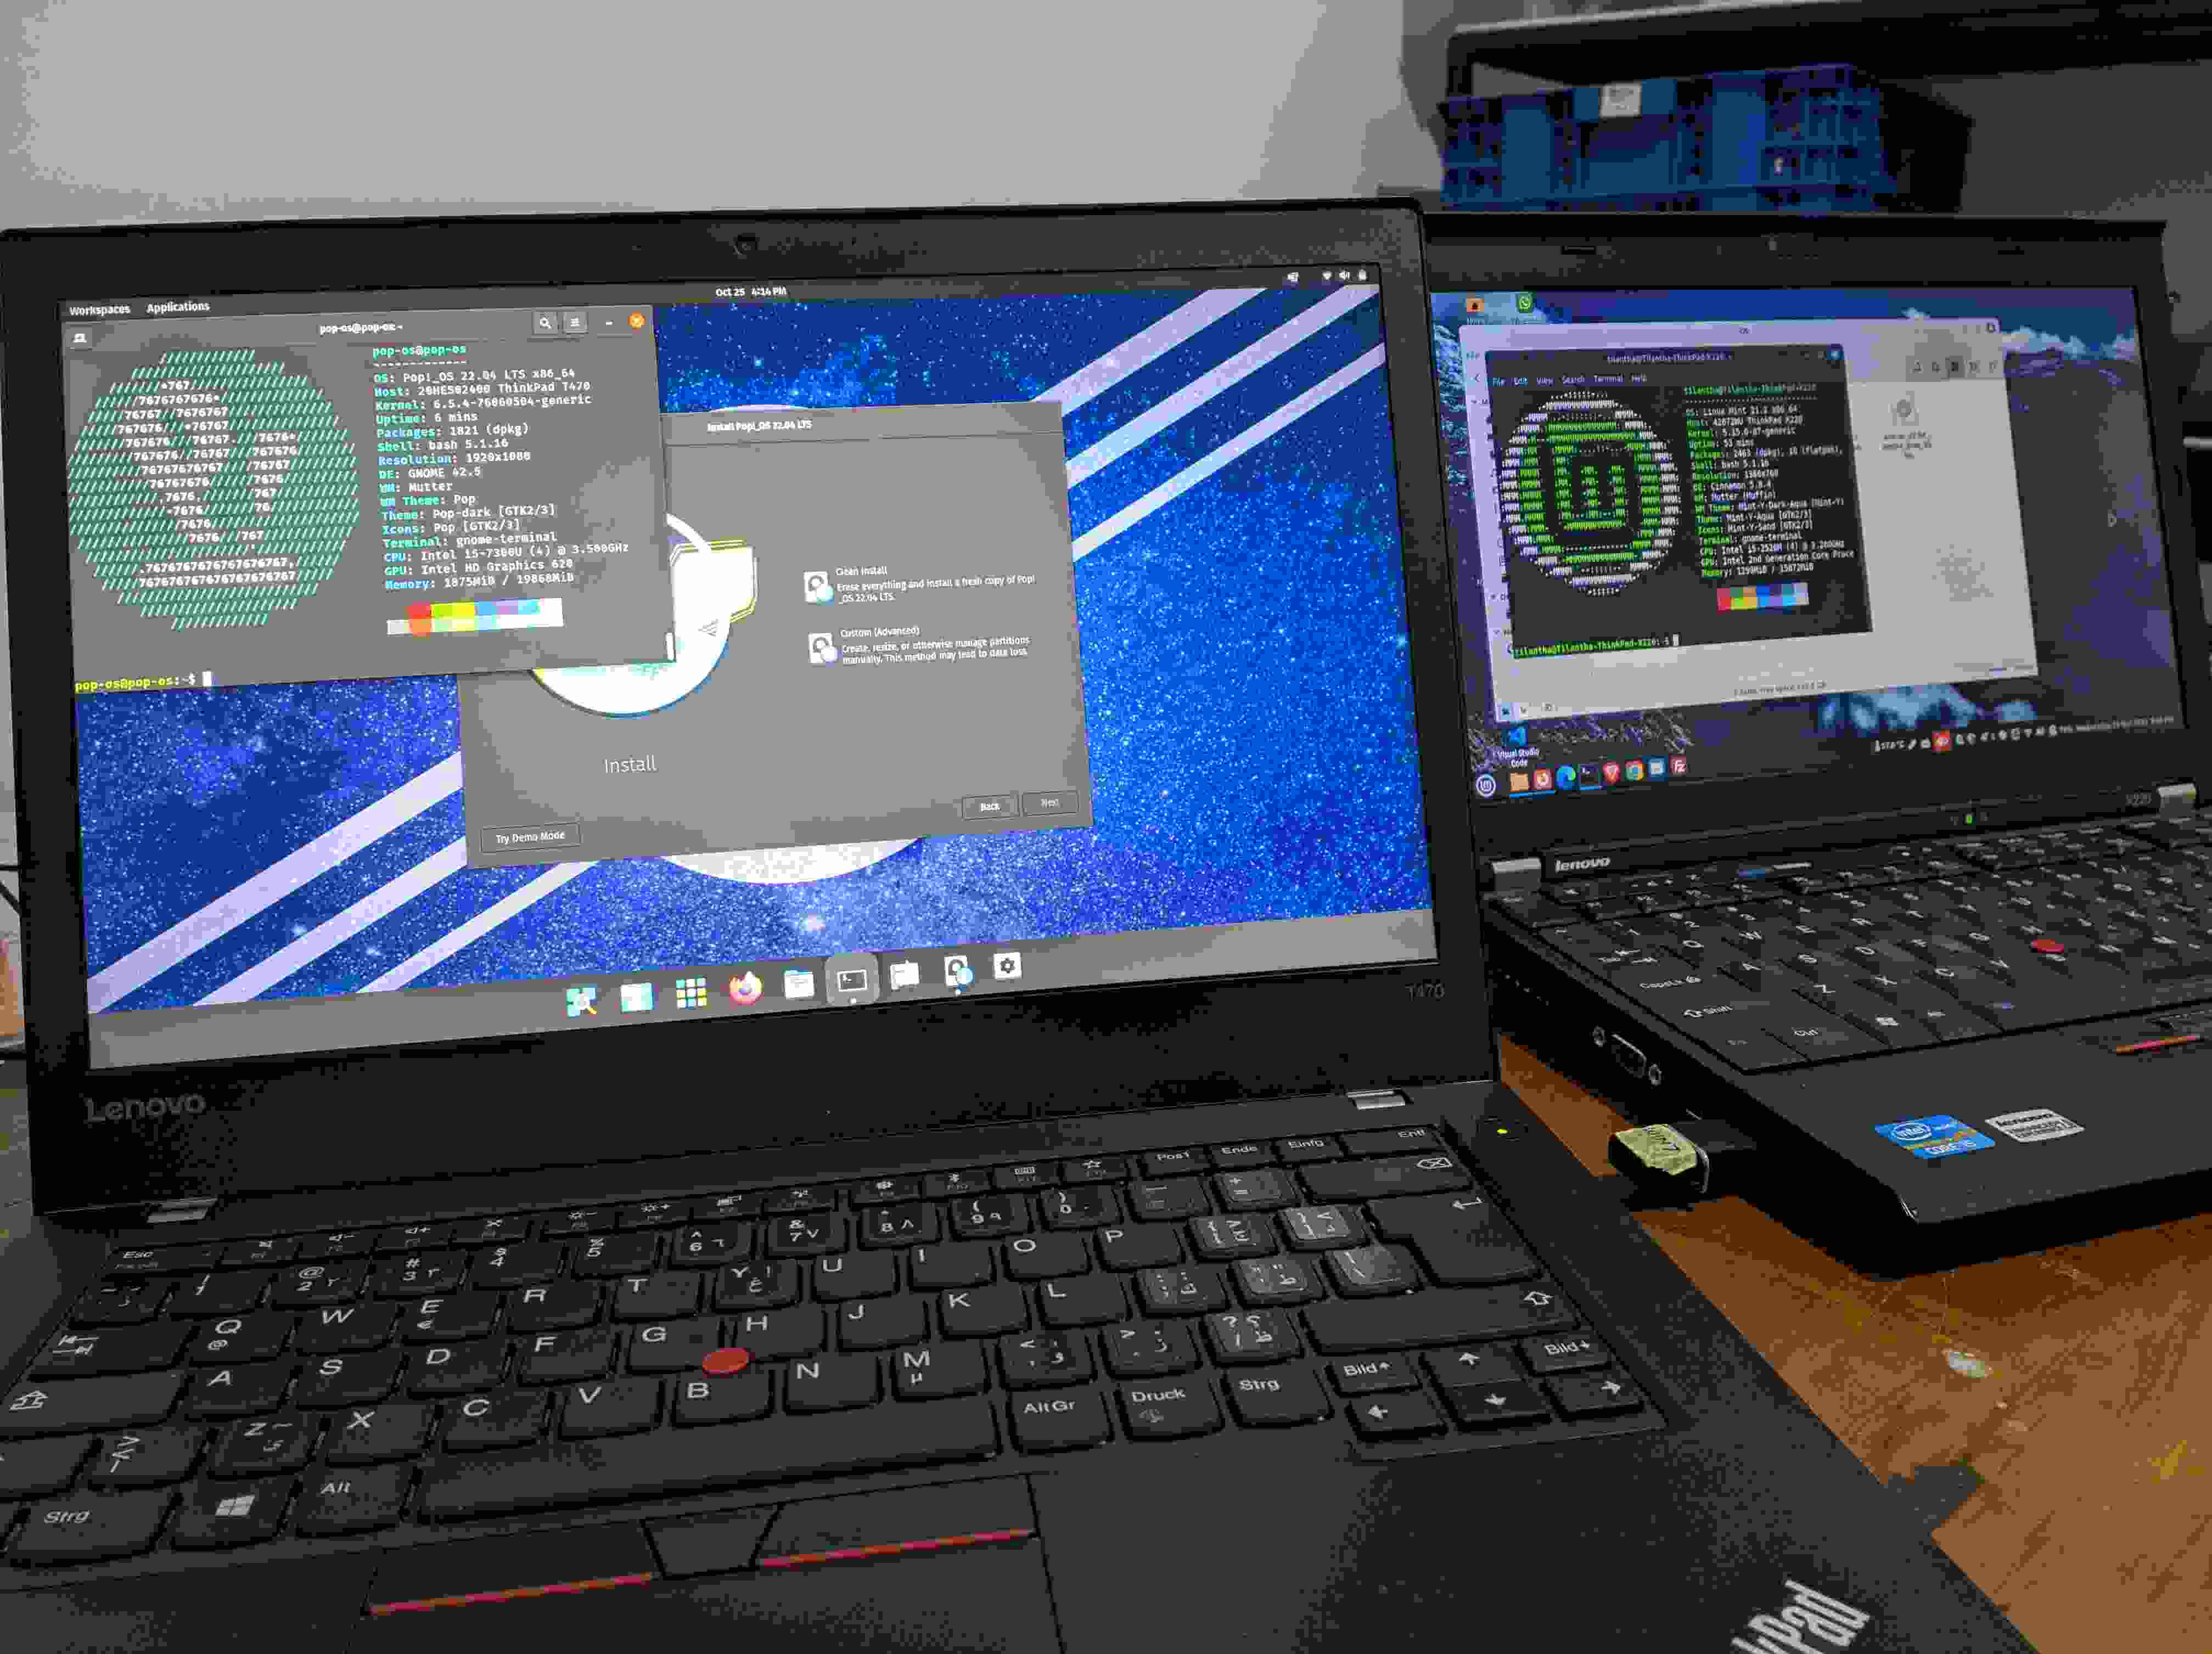 ThinkPad X220 Linux Mint and Resources